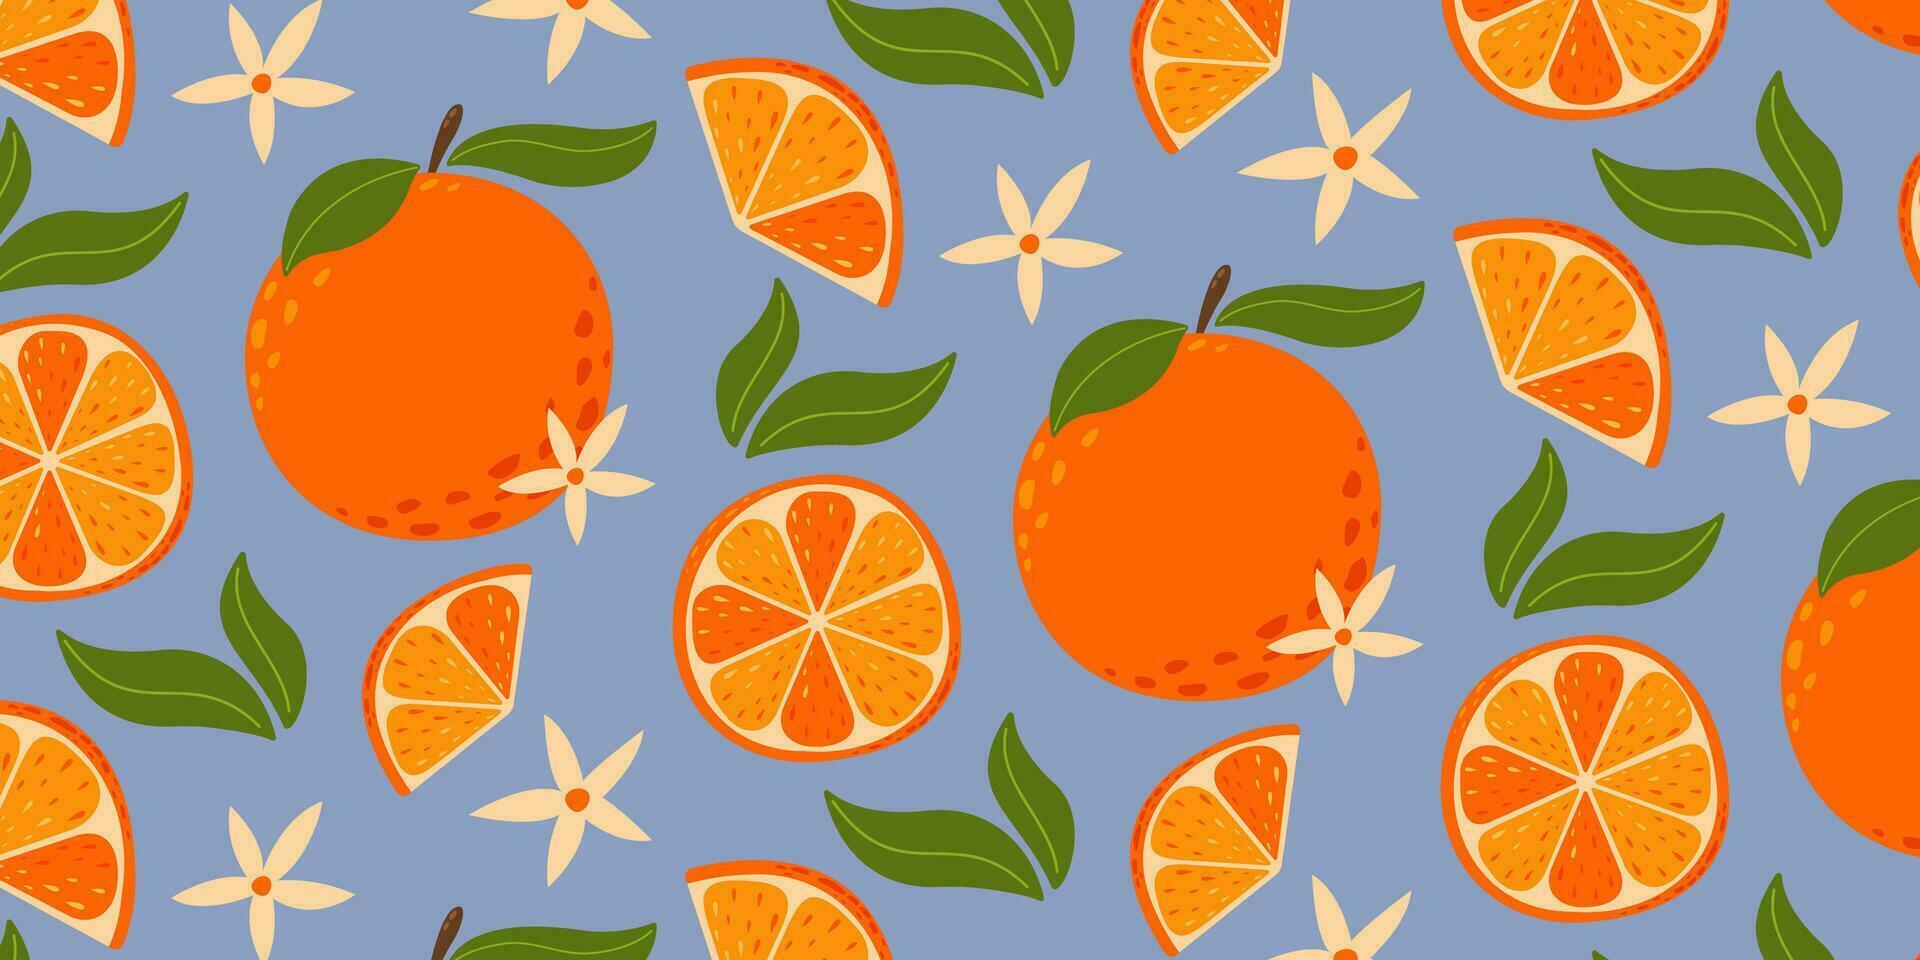 Oranges and flowers background . Summer fruit vector illustration in cartoon flat style on isolated background. For paper, cover, fabric, gift wrapping